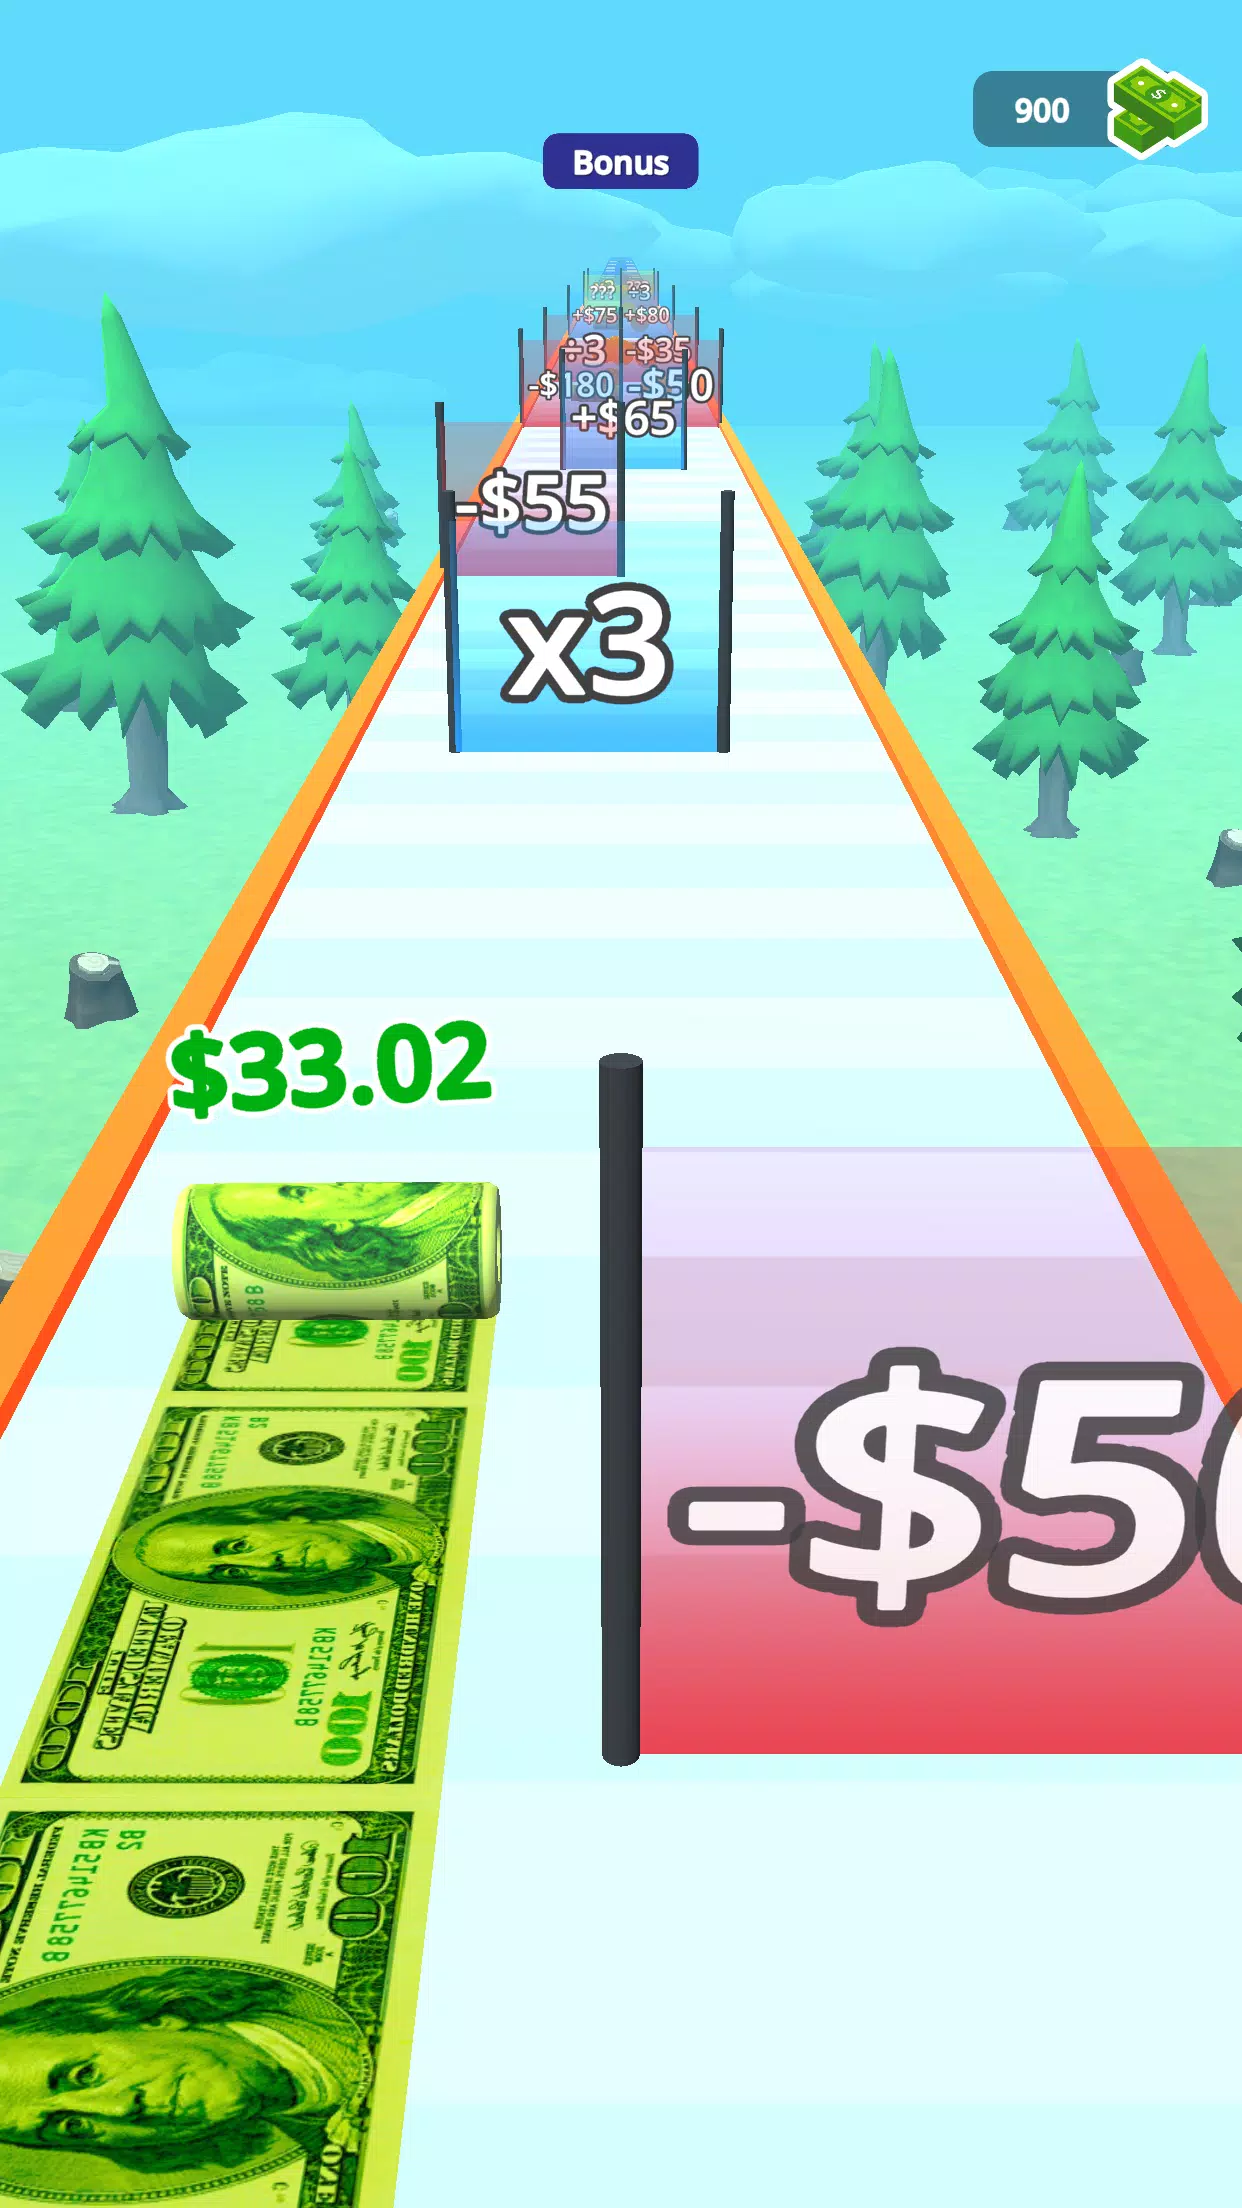 Money Rush - Online Game - Play for Free